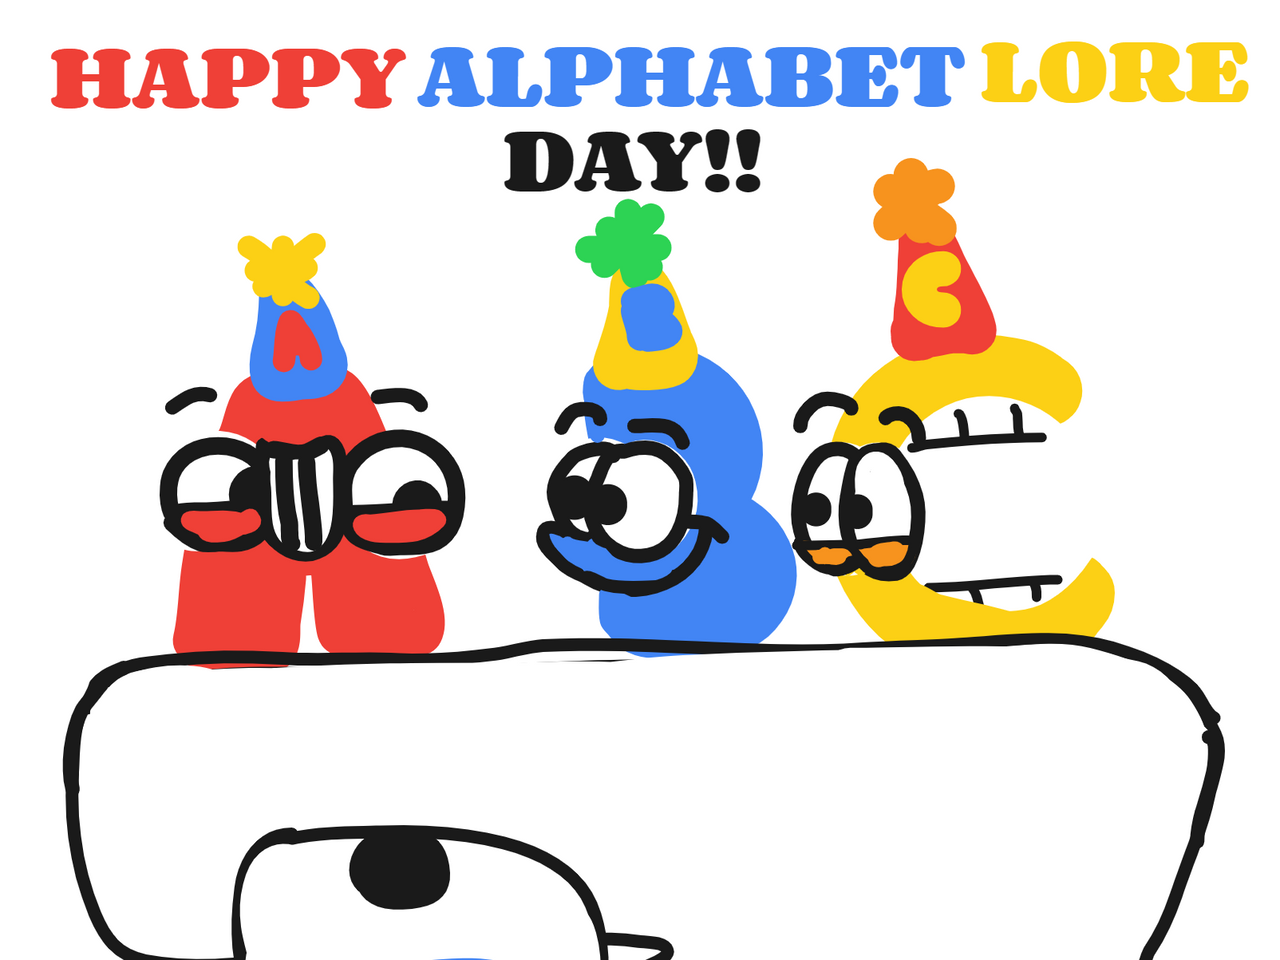 O - Alphabet Lore by ThisIsOokie on DeviantArt